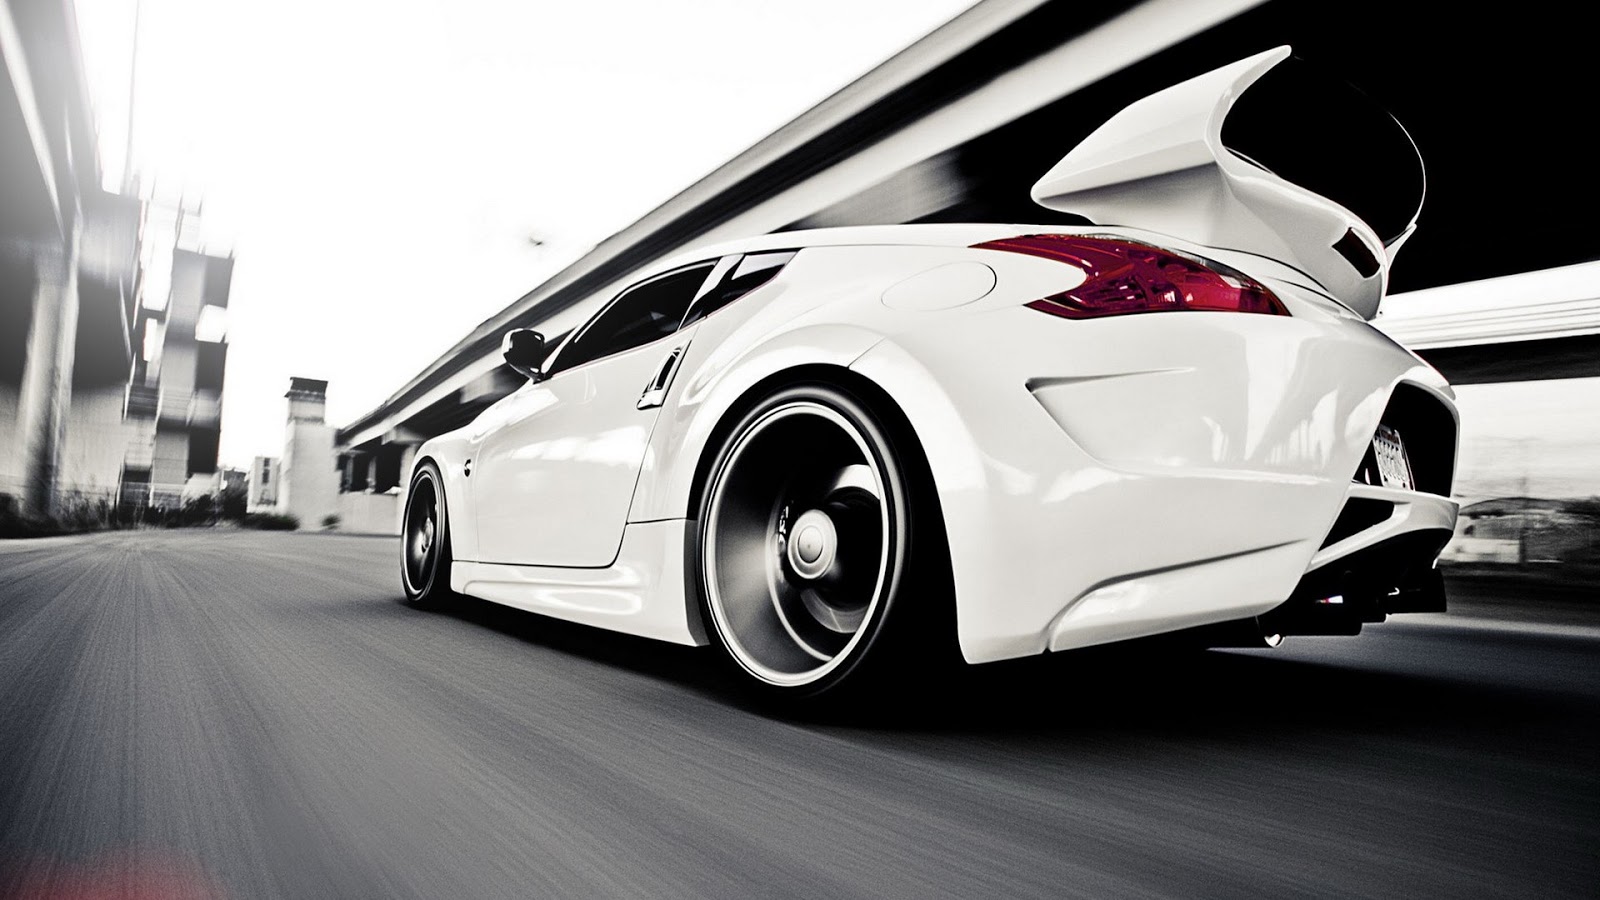 Nissan White Car HD For Desktop - 9to5 Car Wallpapers